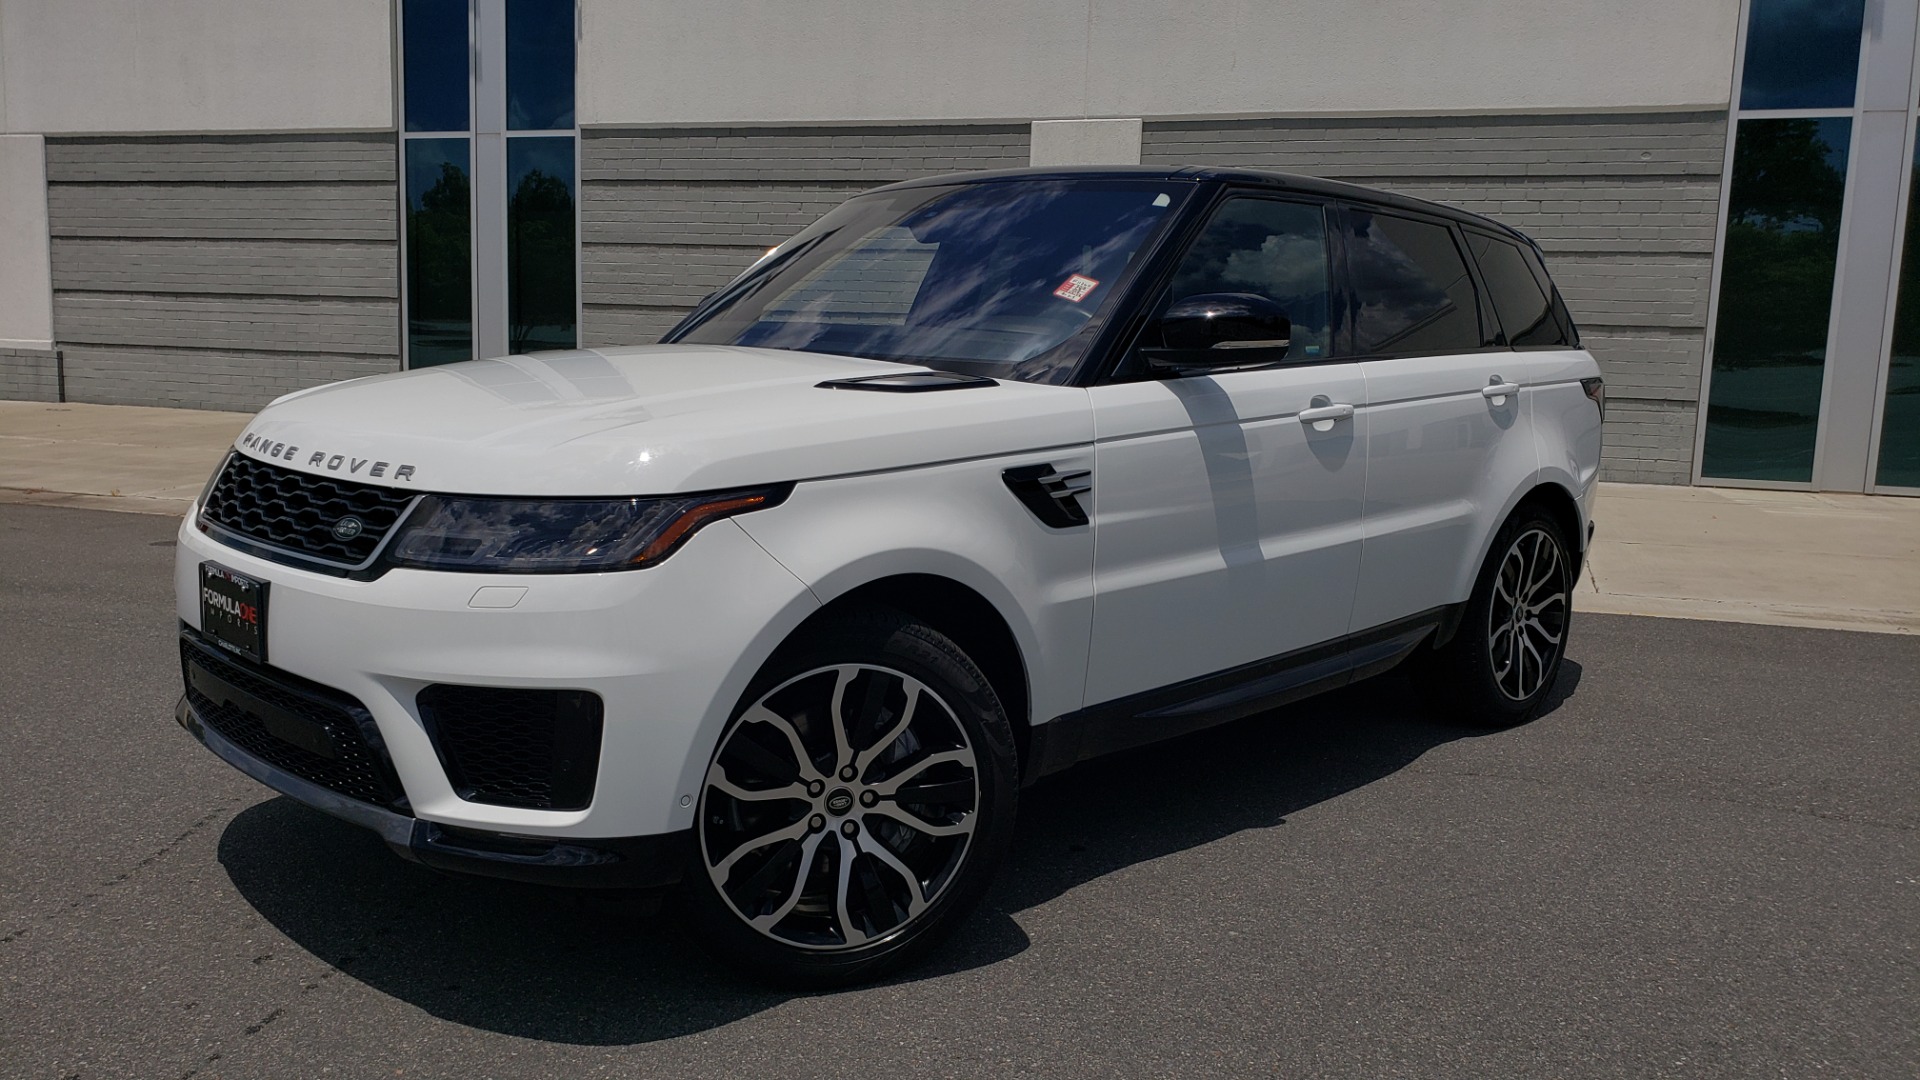 Used 2018 Land Rover RANGE ROVER SPORT HSE / 3.0L SC V6 / 4X4 / NAV / SUNROOF / LANE ASST / REARVIEW for sale Sold at Formula Imports in Charlotte NC 28227 1